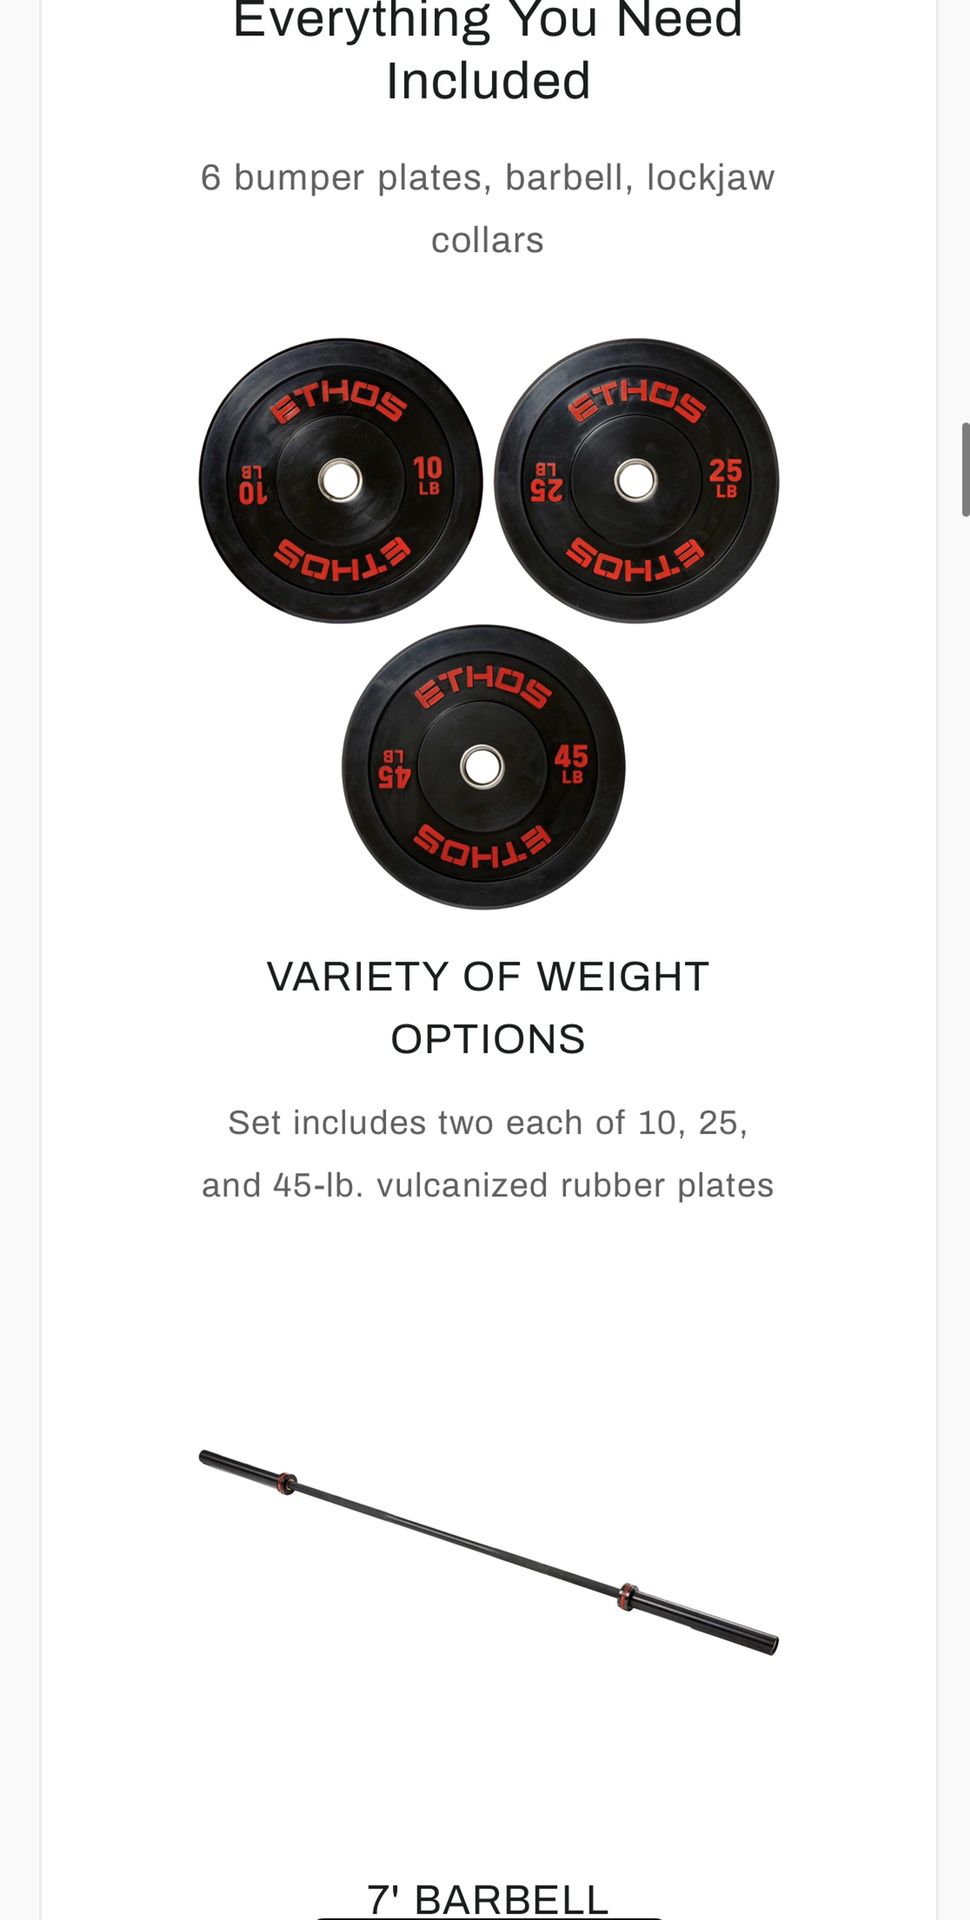 Ethos Olympic weight bumper set 205 lbs total